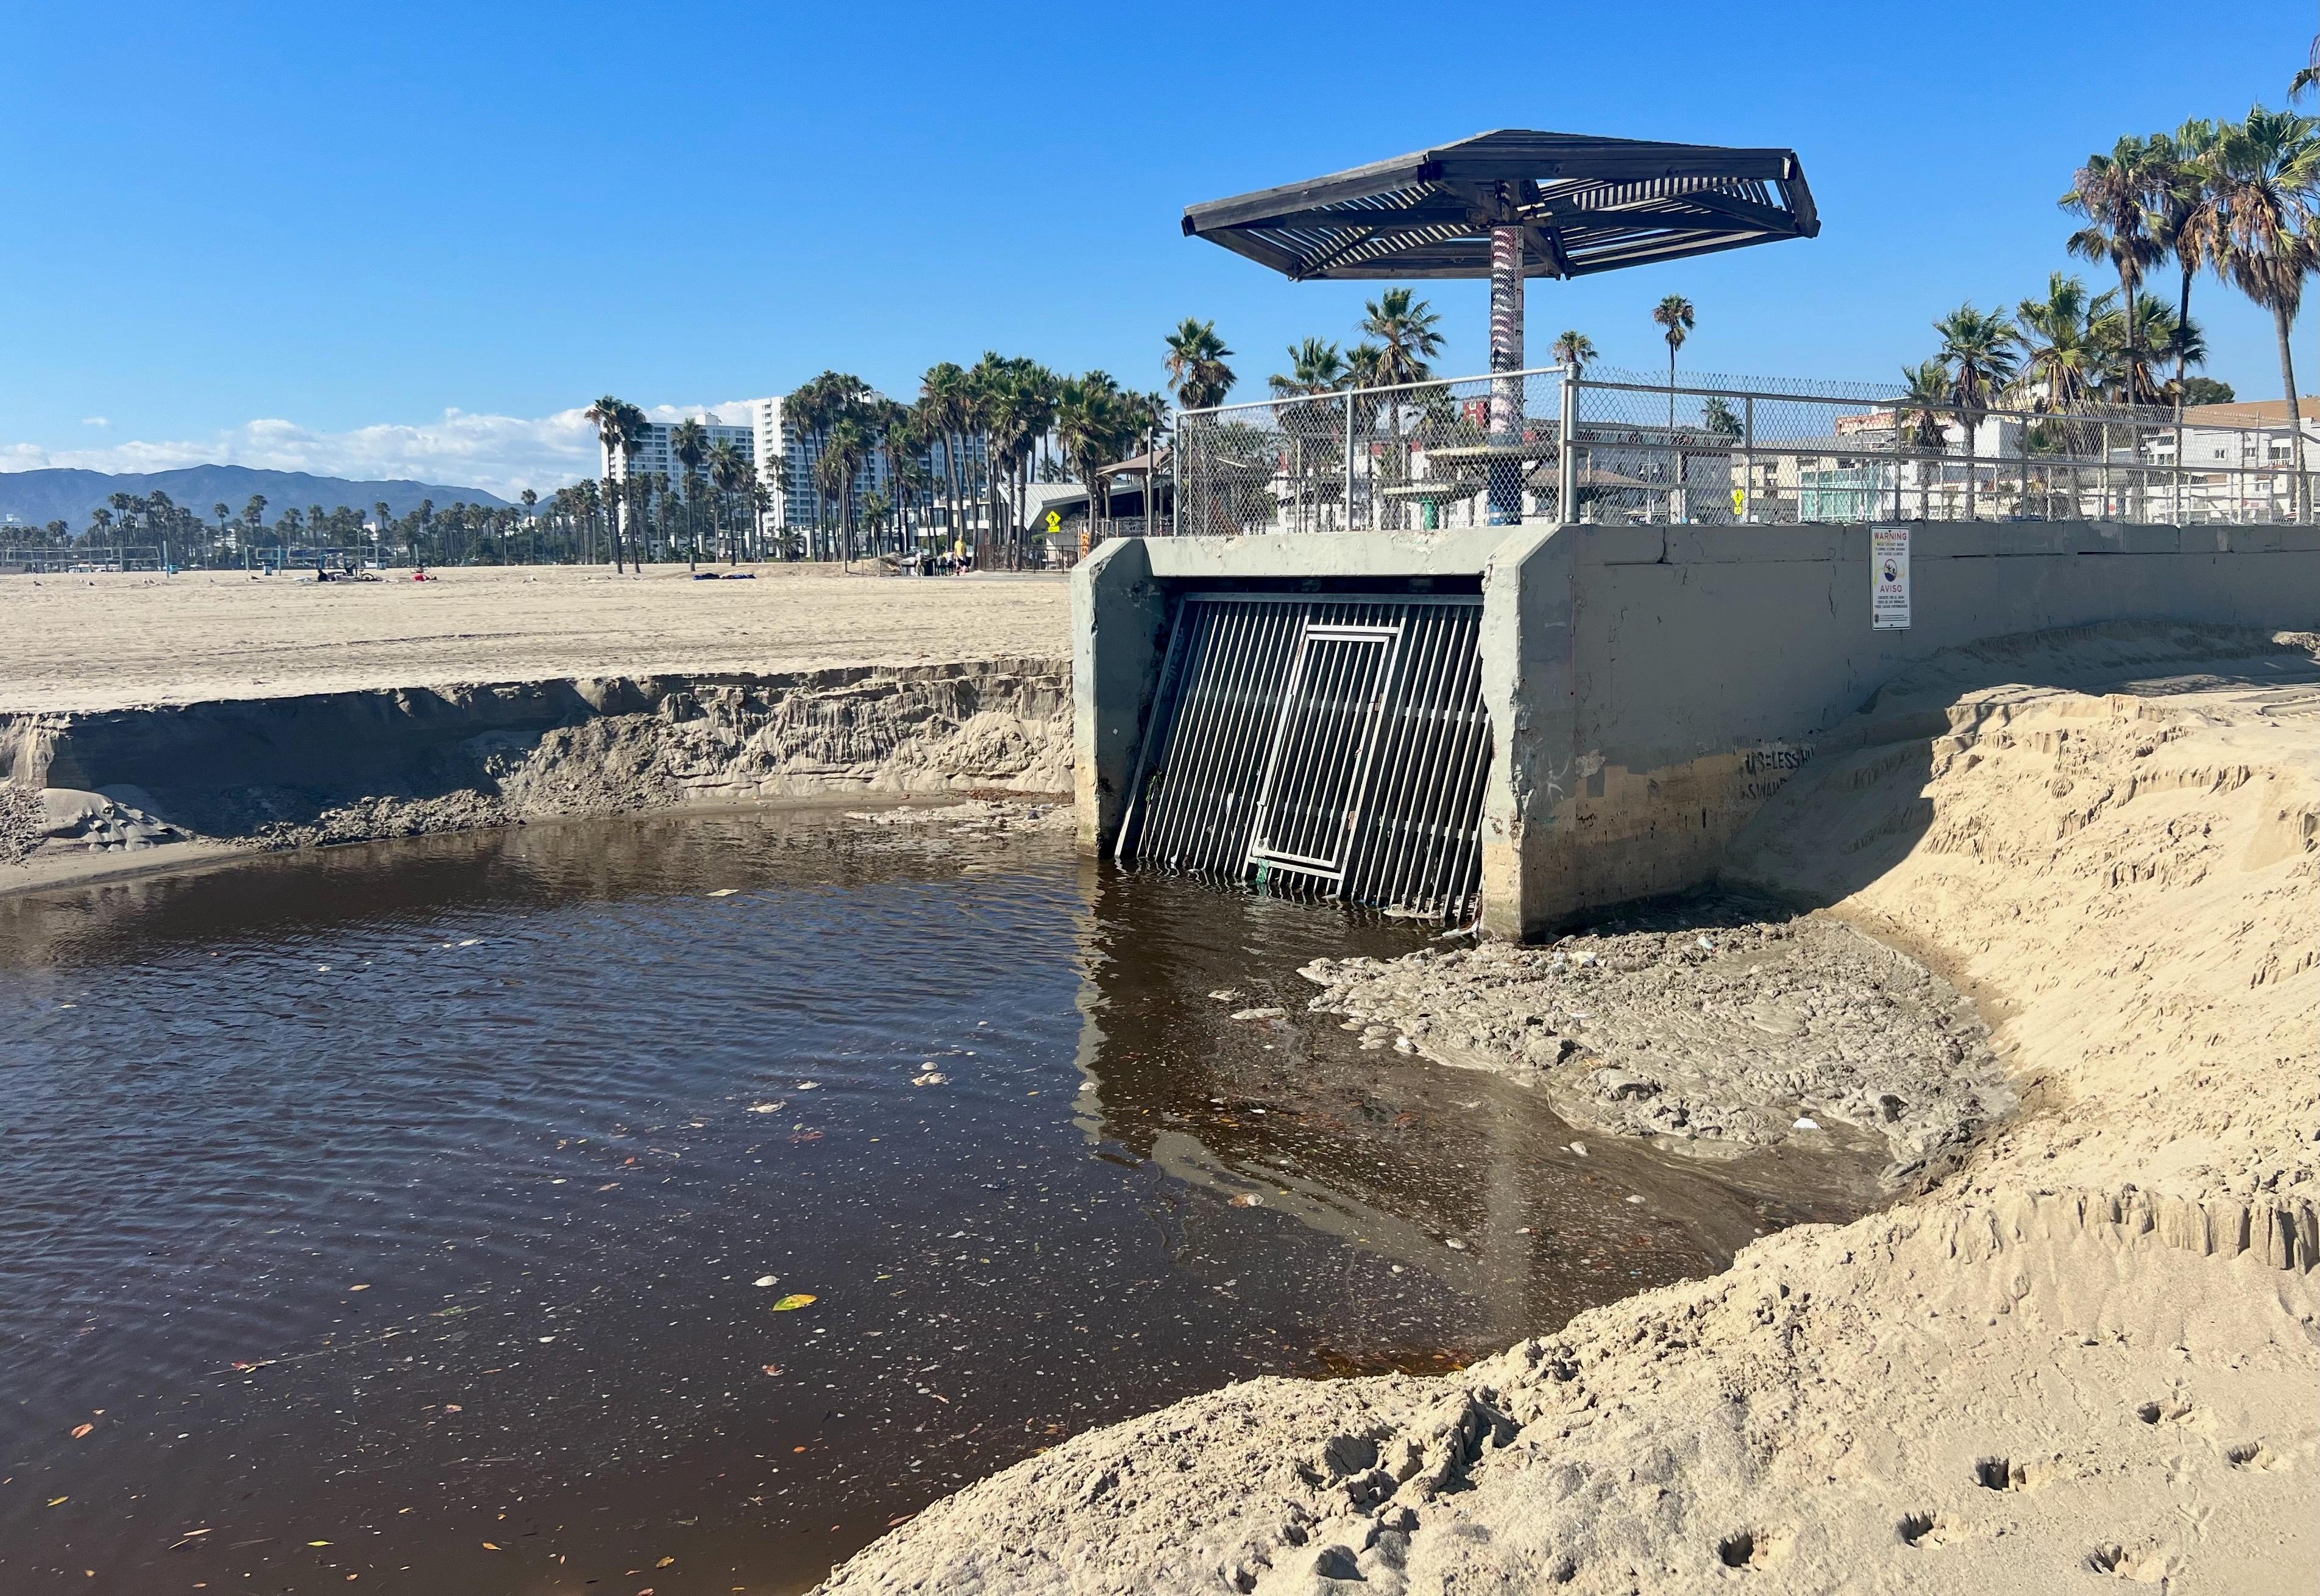 California Wastewater Plants Dump Raw Sewage Into Rivers, Expert Alleges